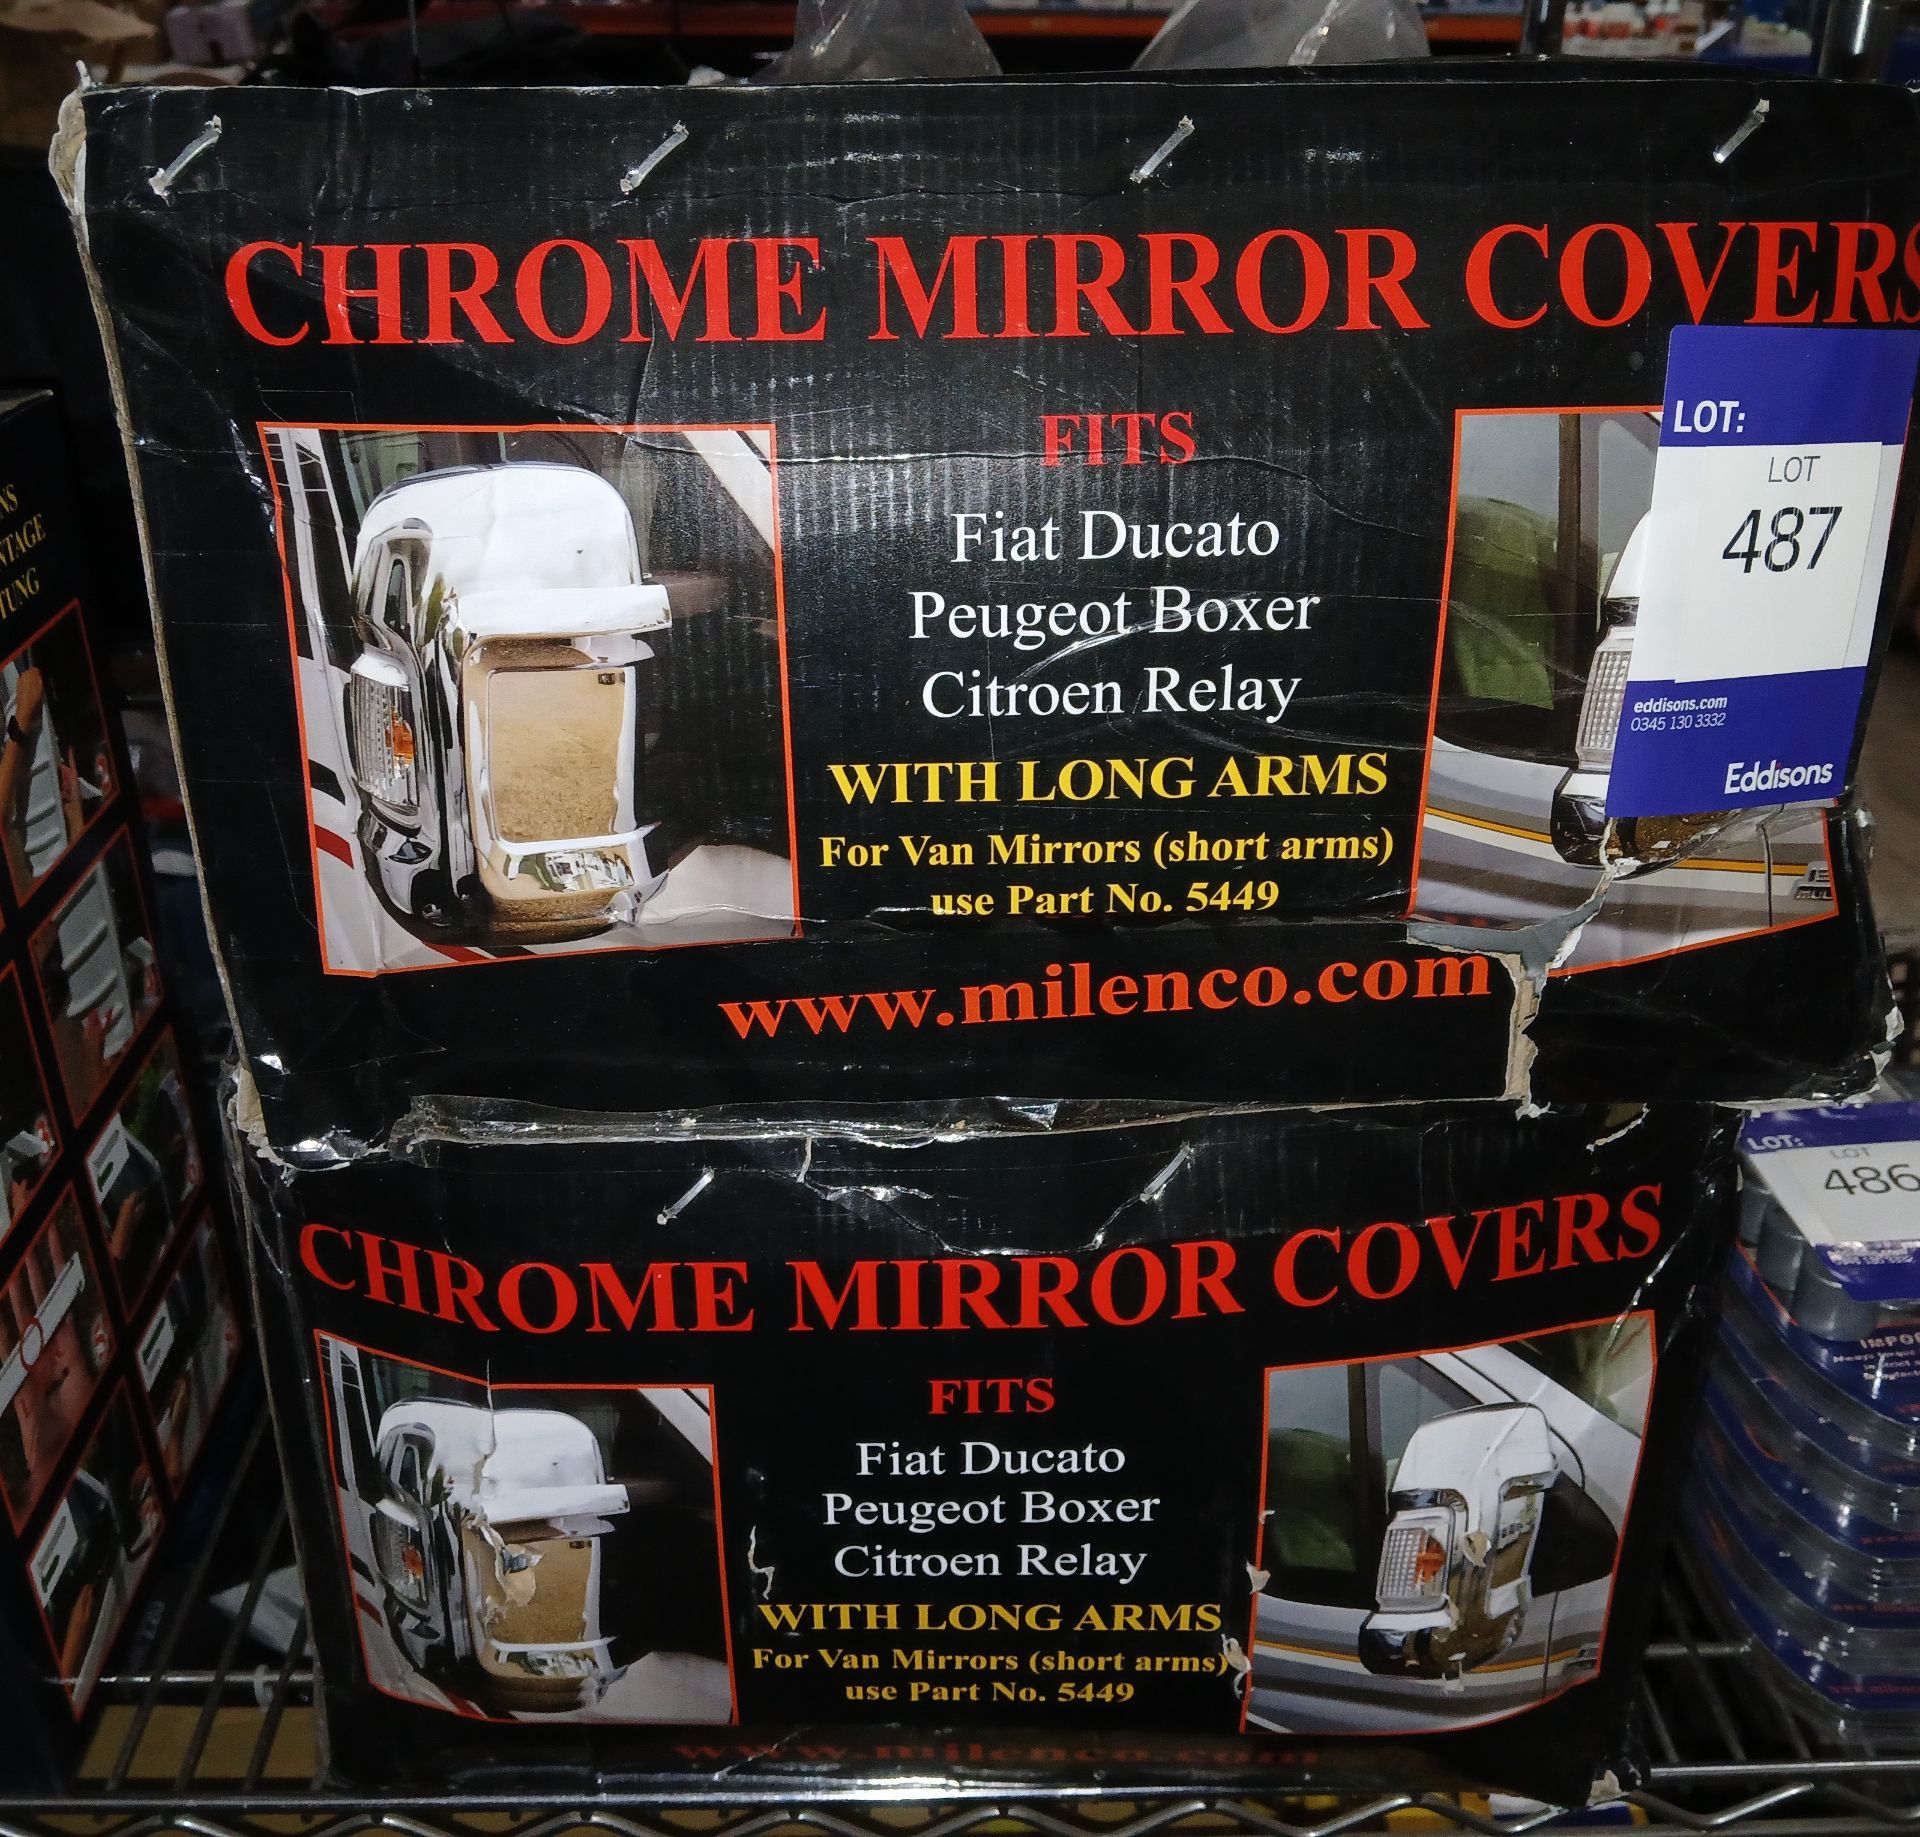 2 x Milenco Chrome Mirror Covers (Please note, Viewing Strongly Recommended - Eddisons have not